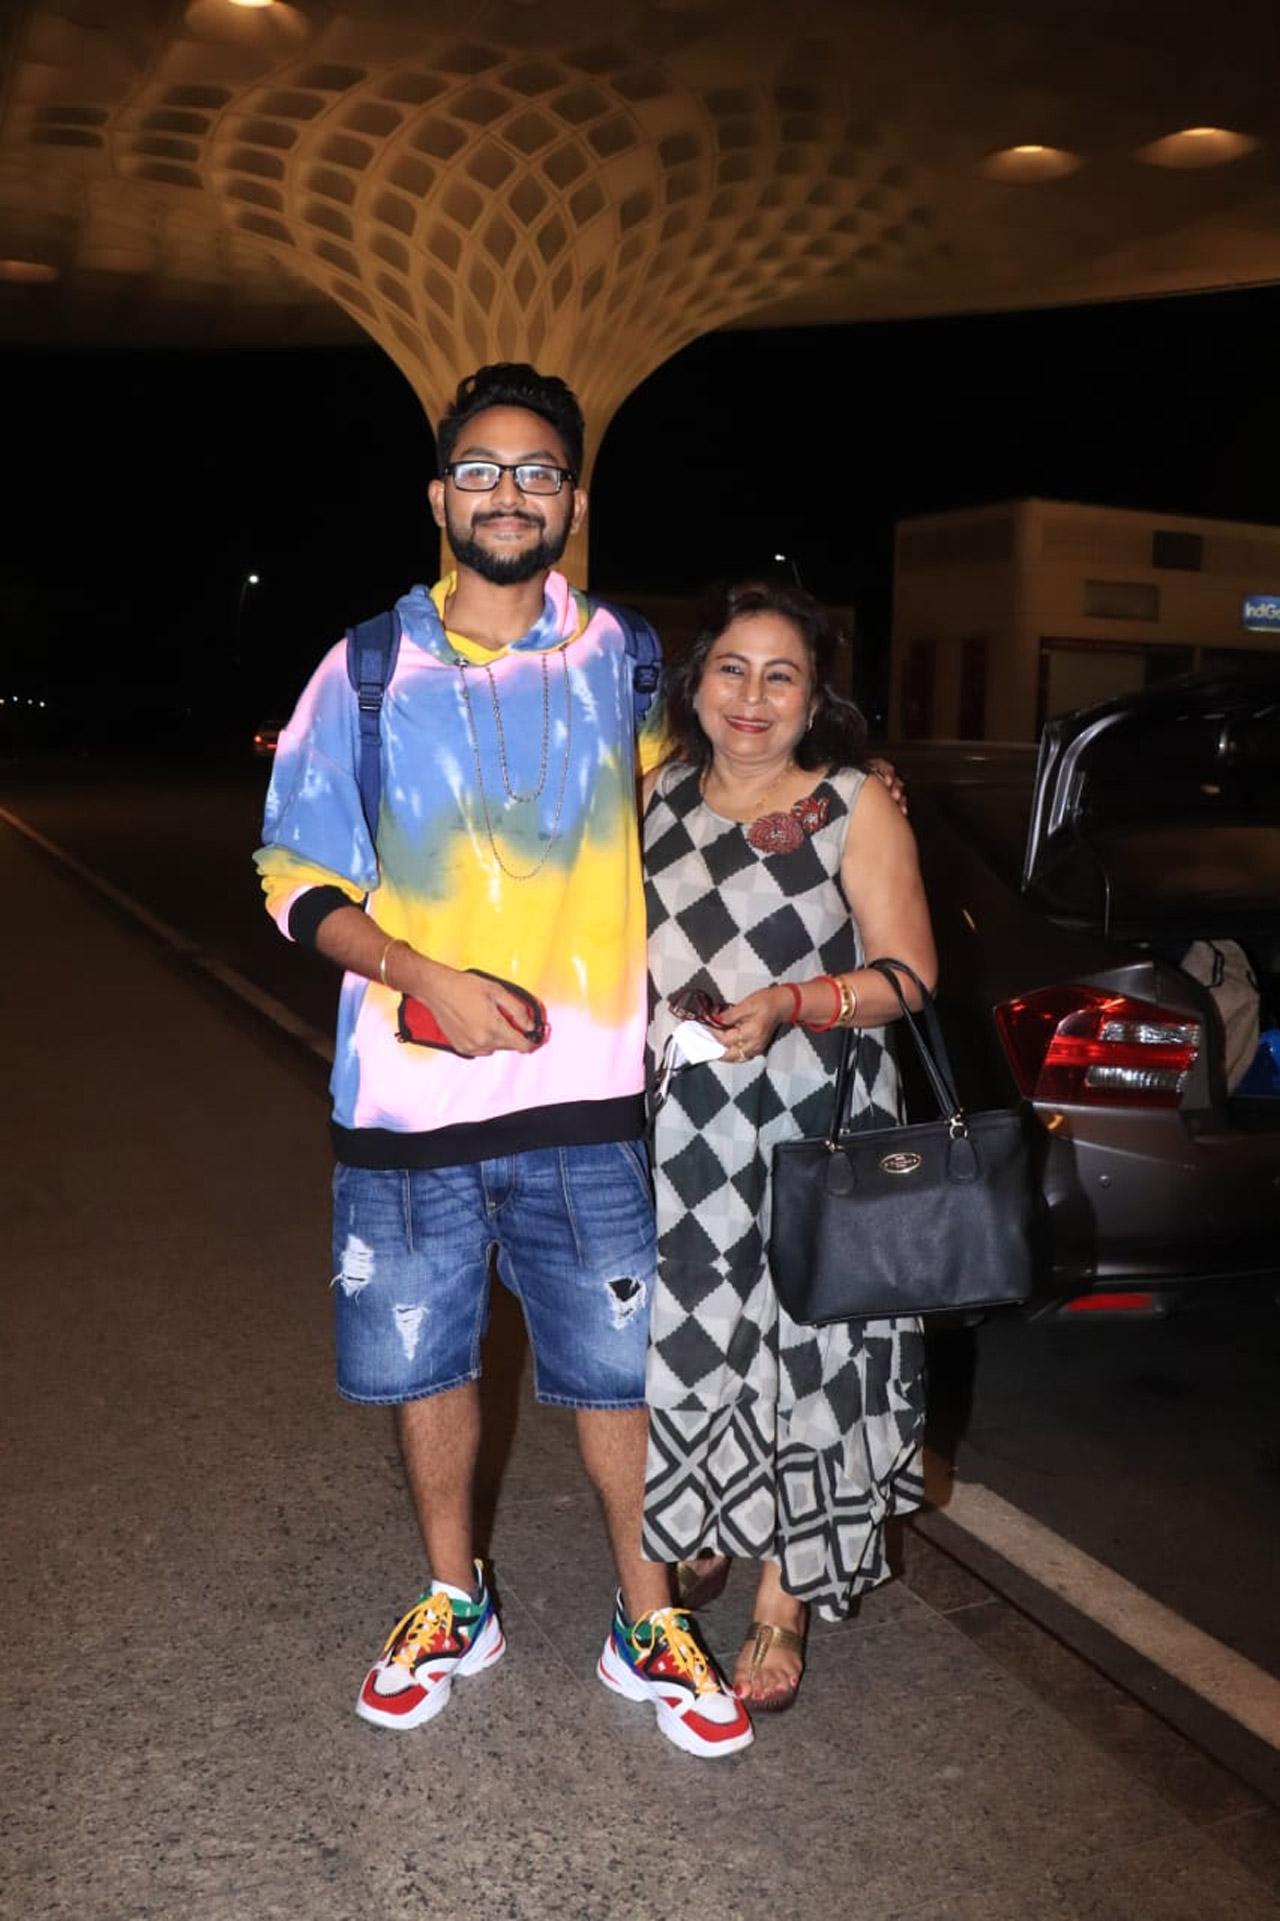 Singer Kumar Sanu's son Jaan Kumar Sanu, who rose to fame with Bigg Boss Season 14, was snapped at Mumbai Airport with his mother Rita Bhattacharya. The latter, too, made headlines last year, after she spoke on behalf of her son on various controversies surrounding Jaan.